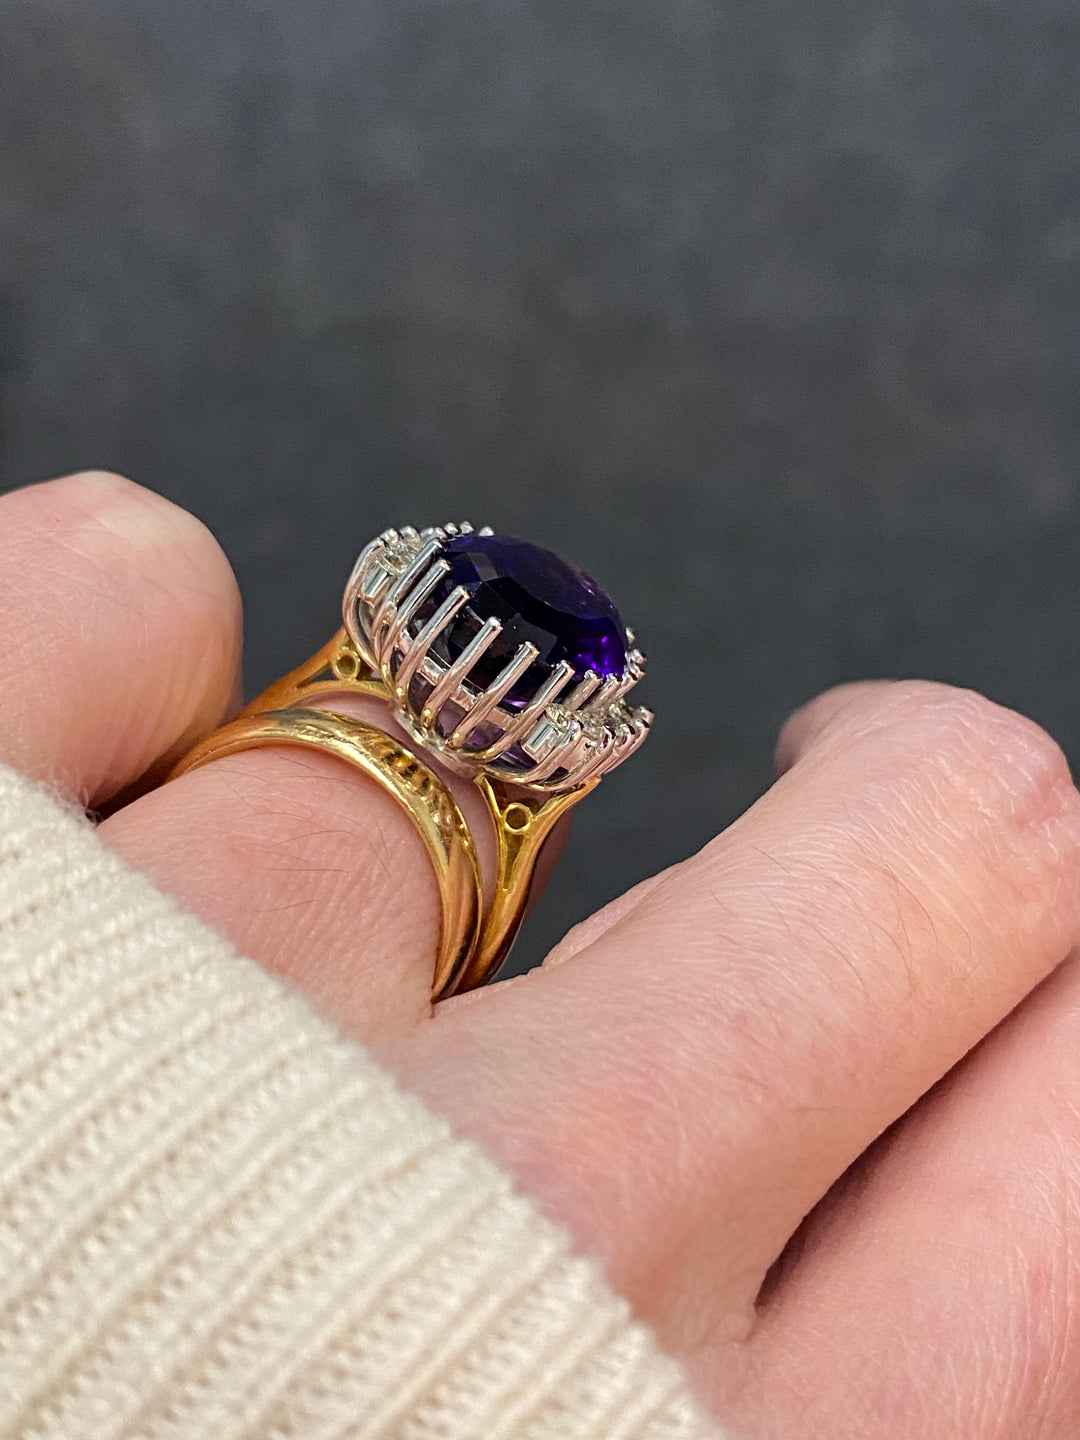 Vintage 10.00 Carat Amethyst and Diamond Ring in 18ct White and Yellow Gold